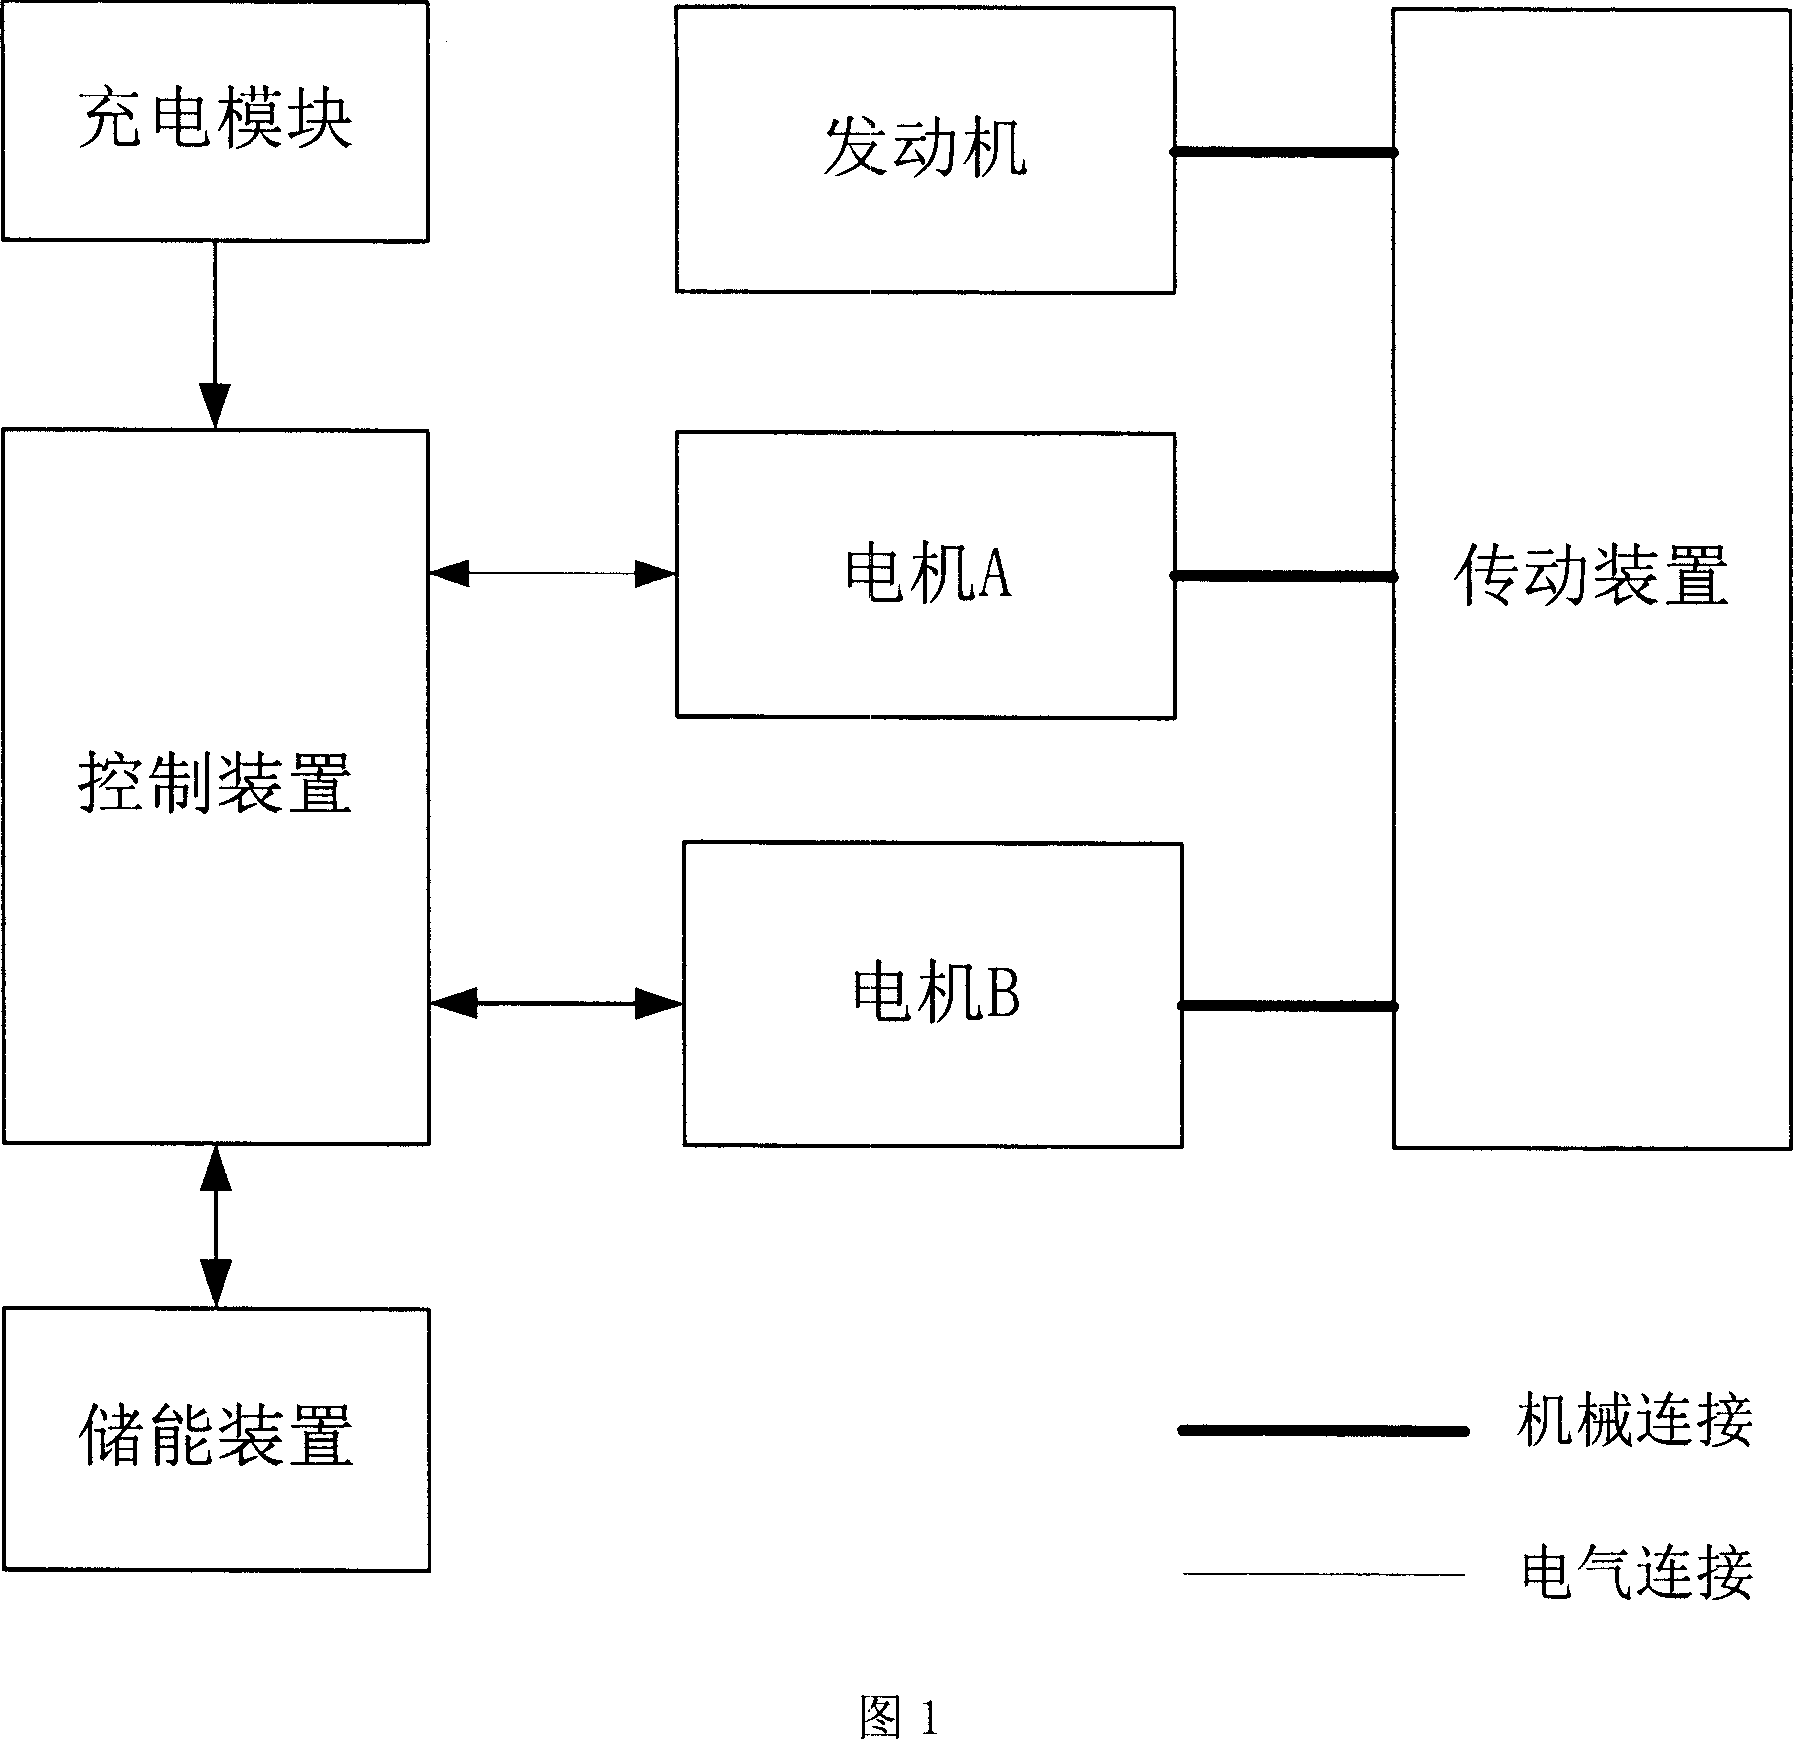 Power system of charged type hybrid power electric automobile